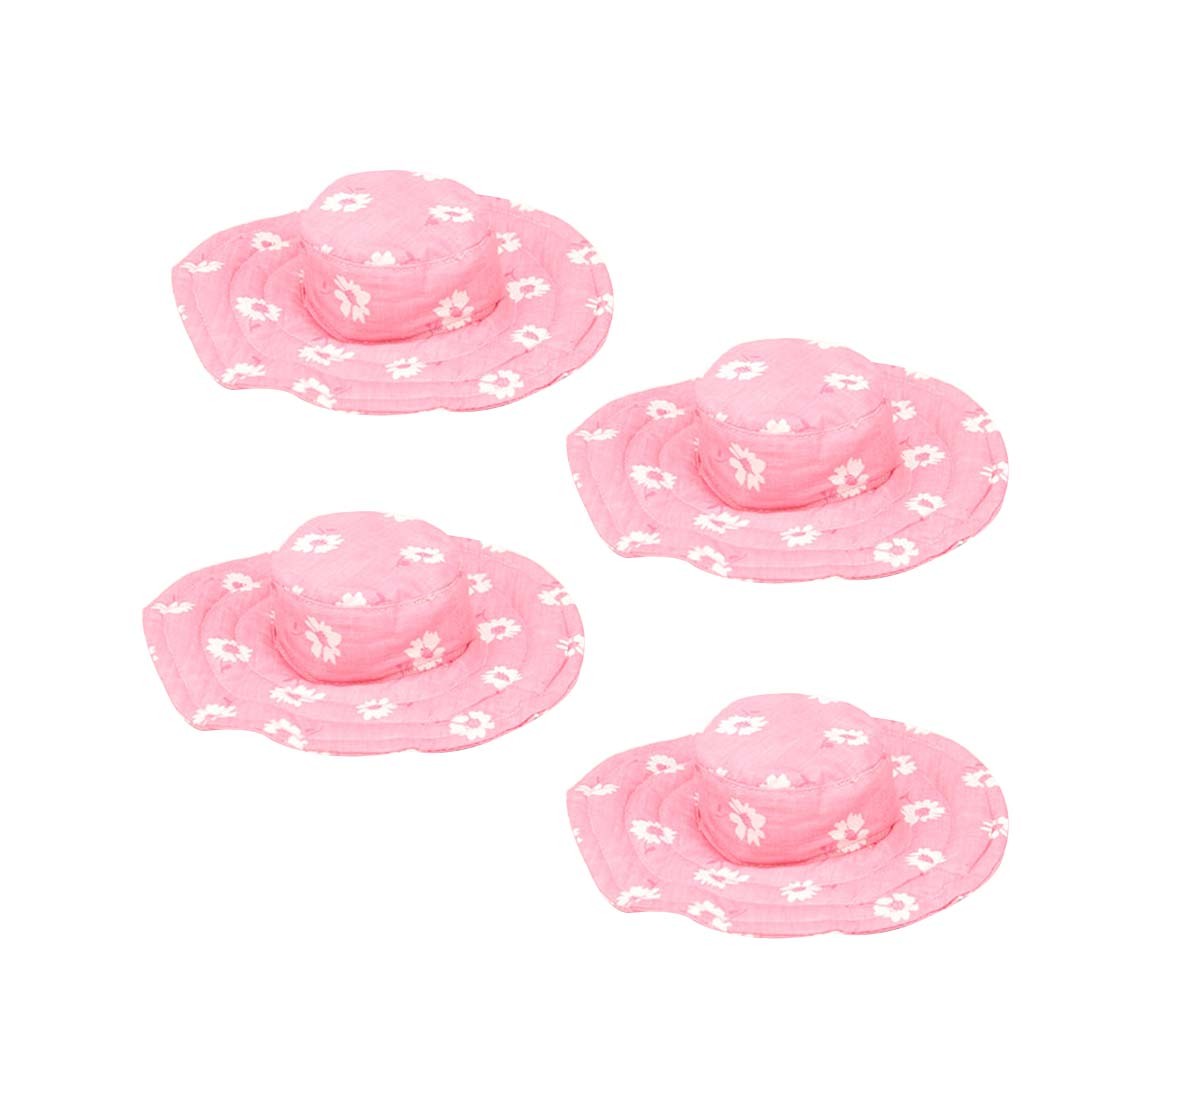 4Pcs Summer Pet Topee Pet Accessories For Little Dogs&Cats,Pink